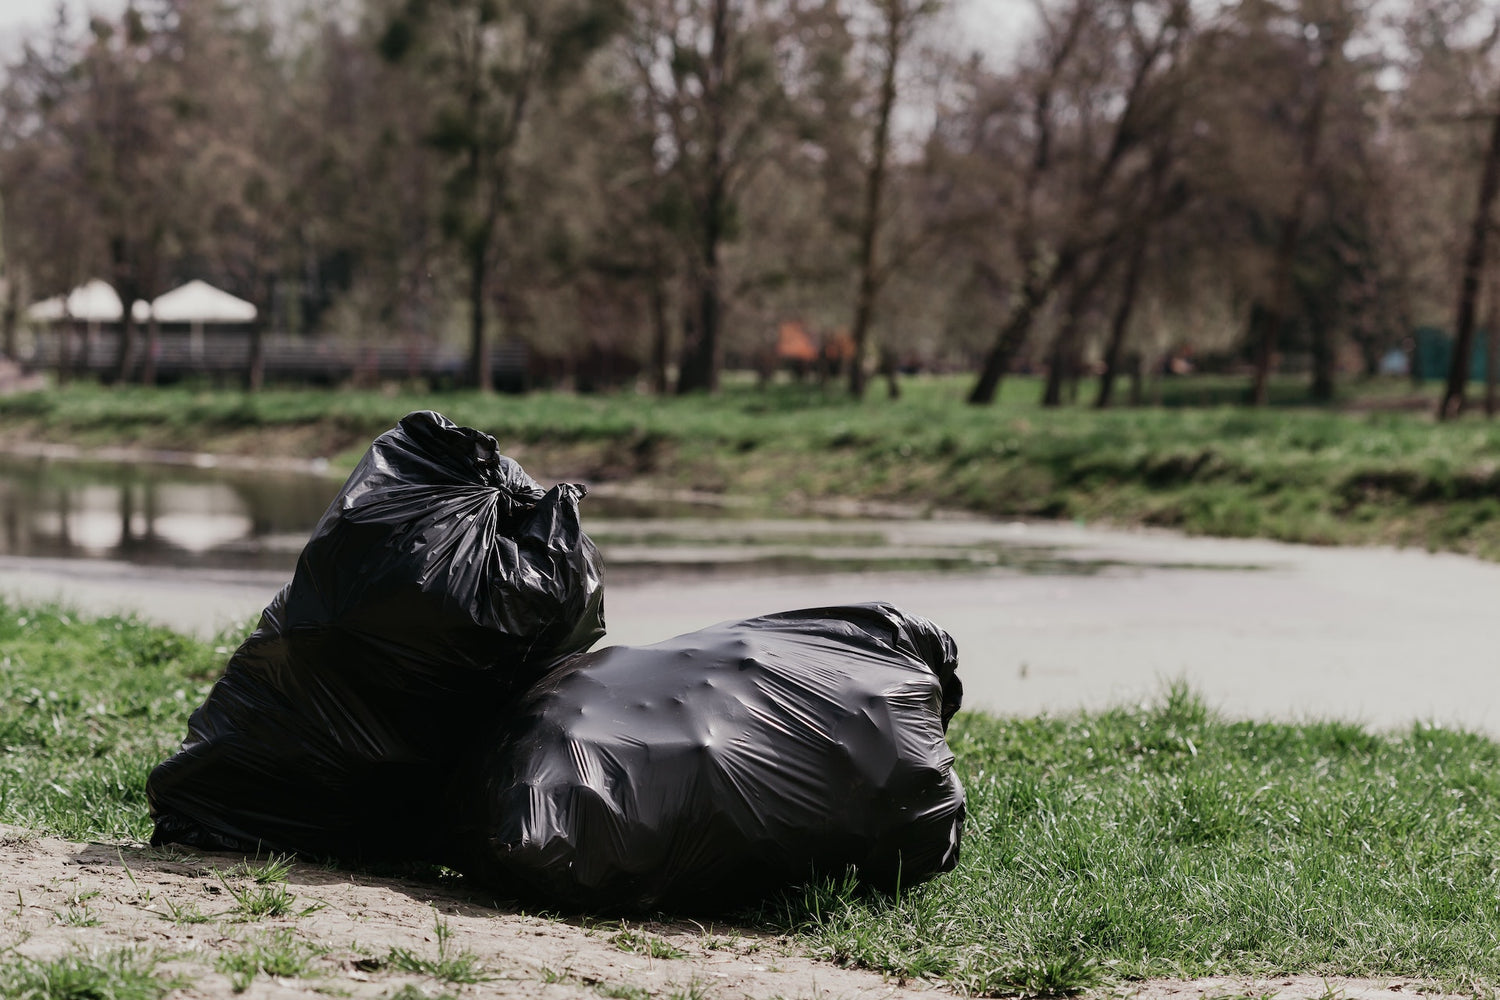 Non-biodegradable garbage bags are everywhere